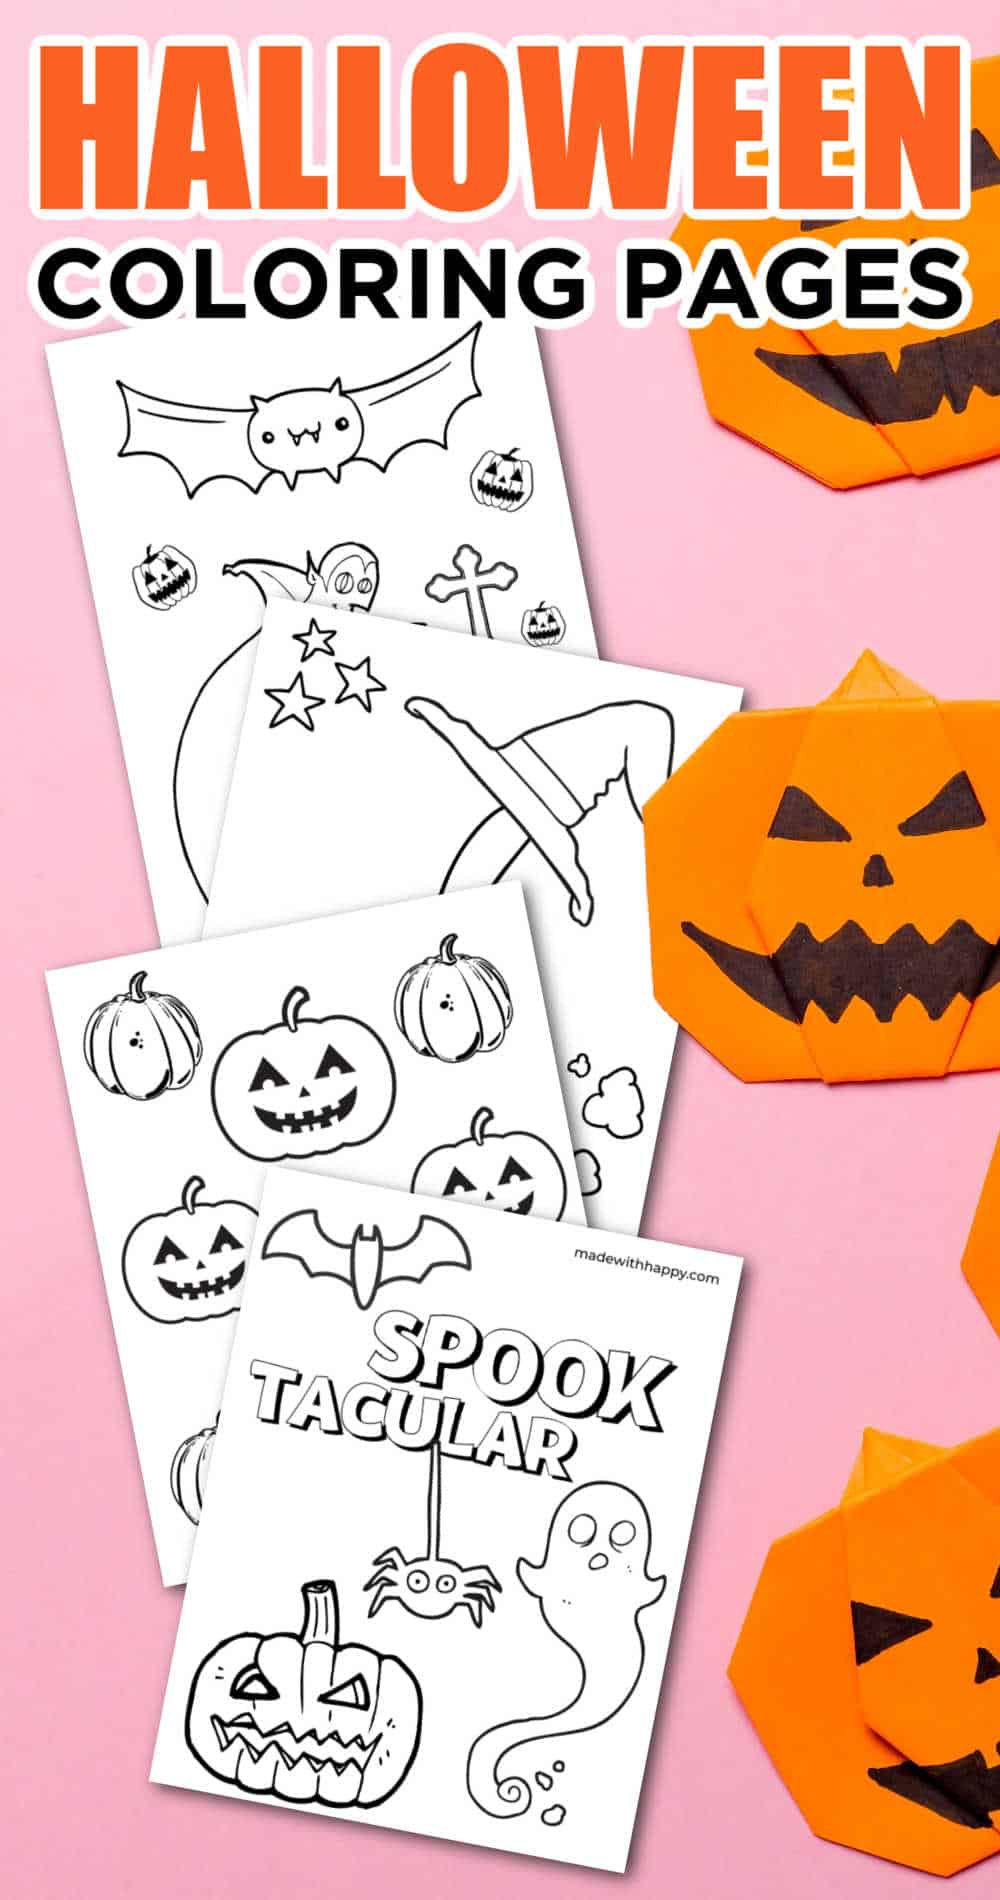 free-halloween-coloring-pages-printable-made-with-happy